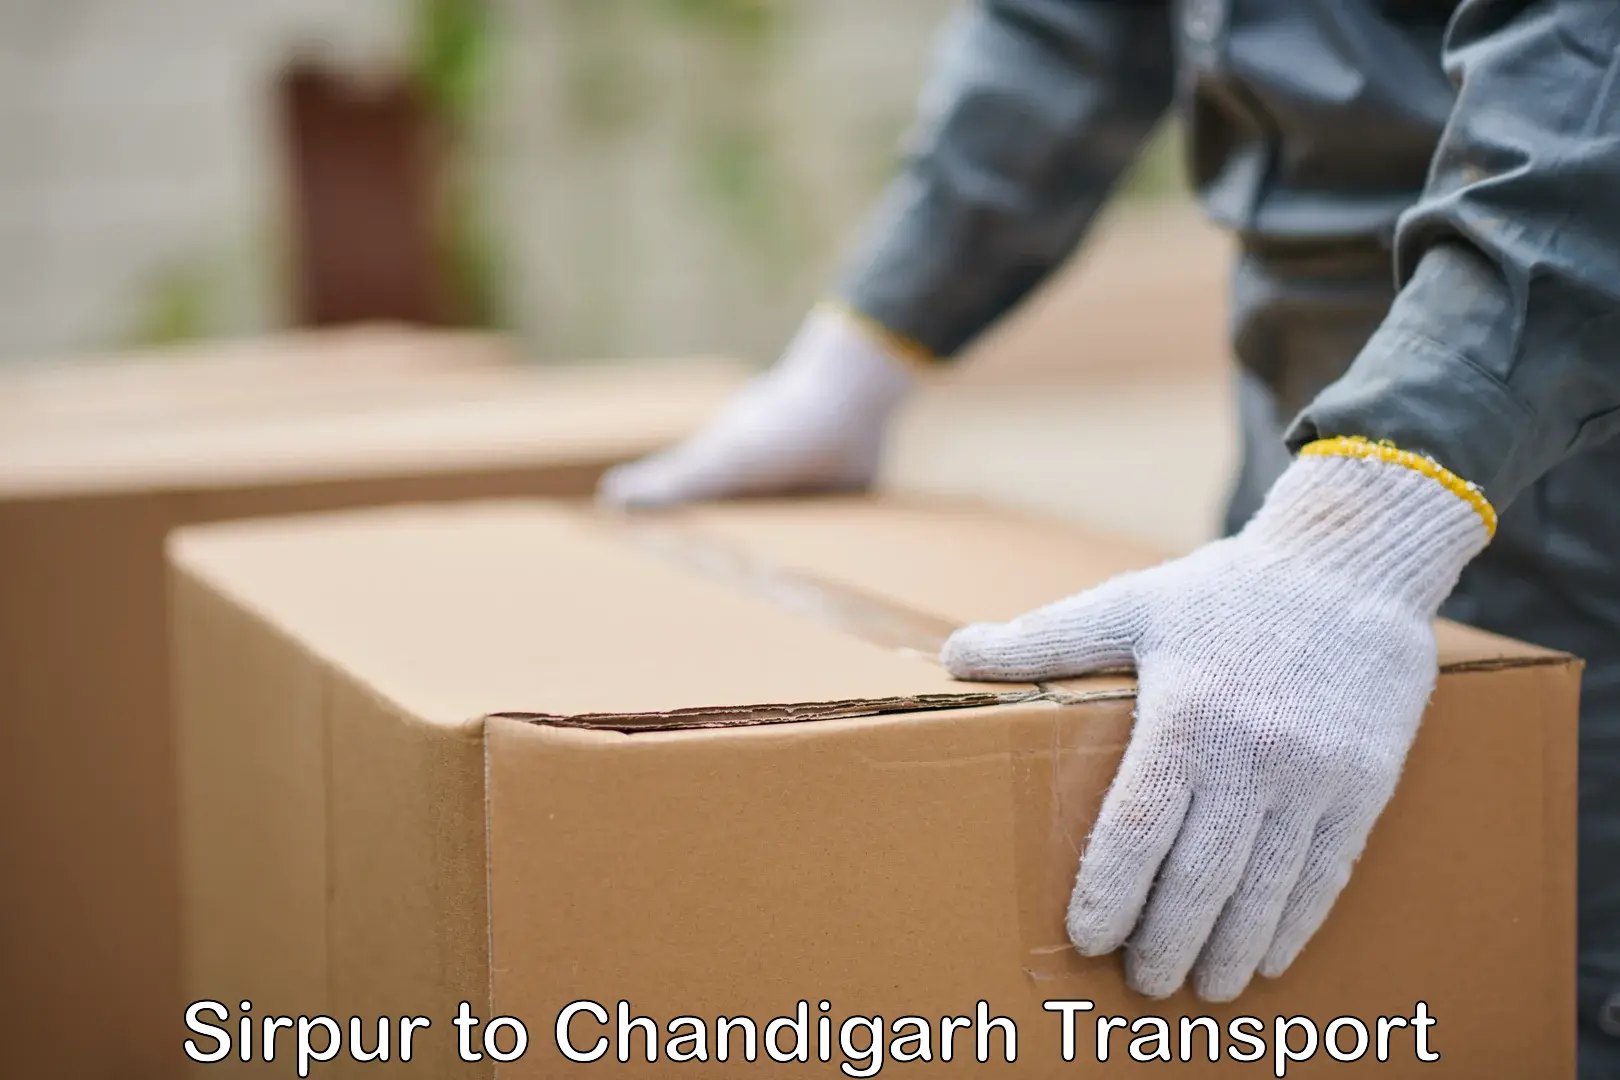 Truck transport companies in India Sirpur to Chandigarh